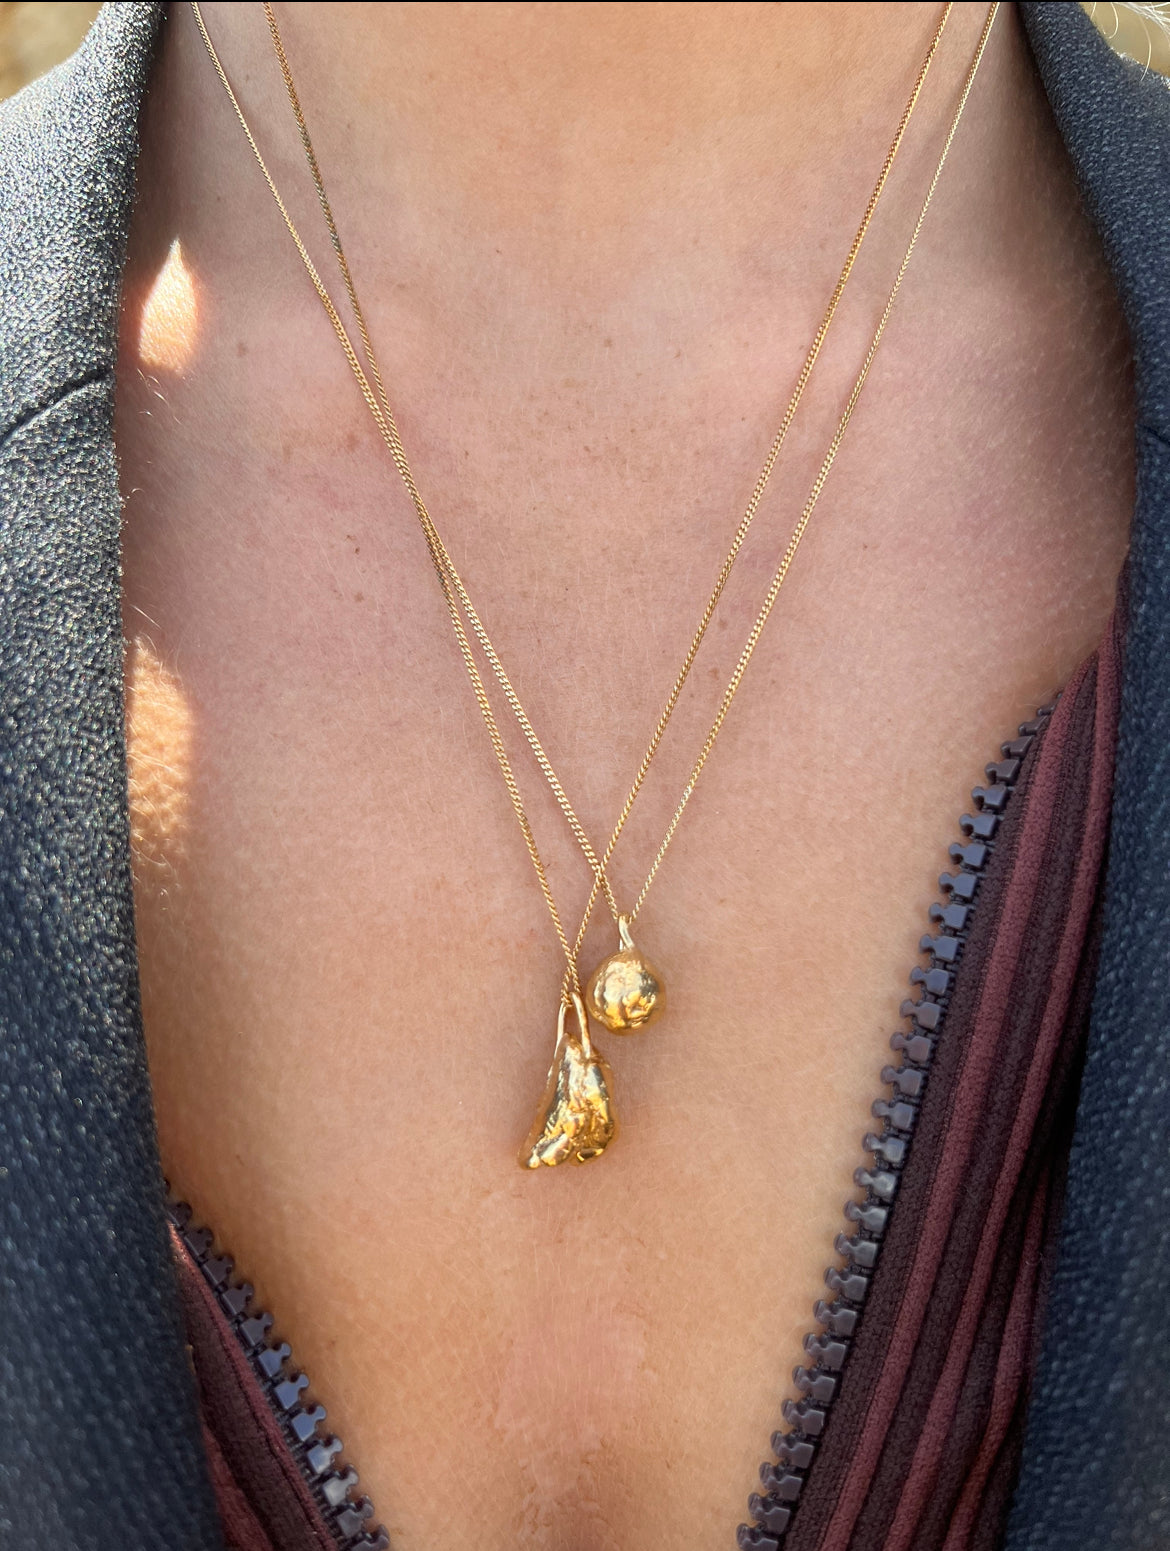 MILO Necklace - Sterling Silver with 22k Gold Plating